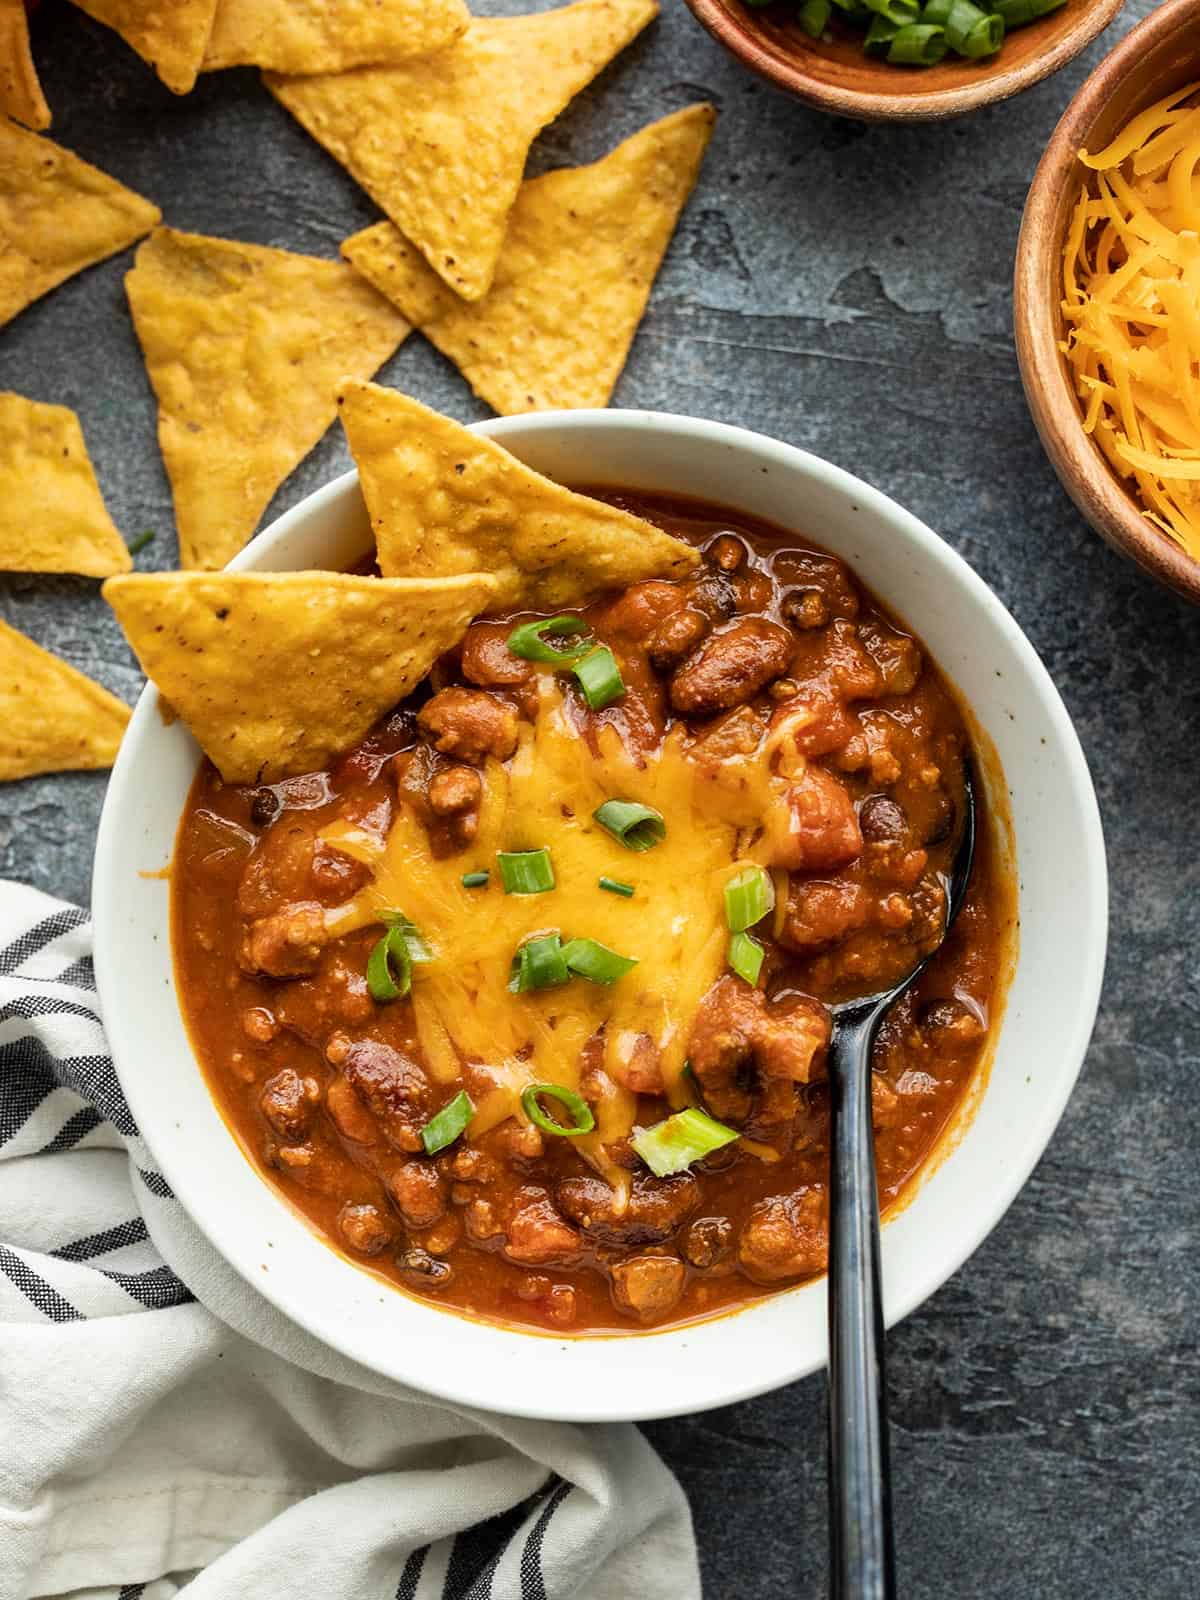 A bowl of pumpkin chili with cheese and tortilla chips